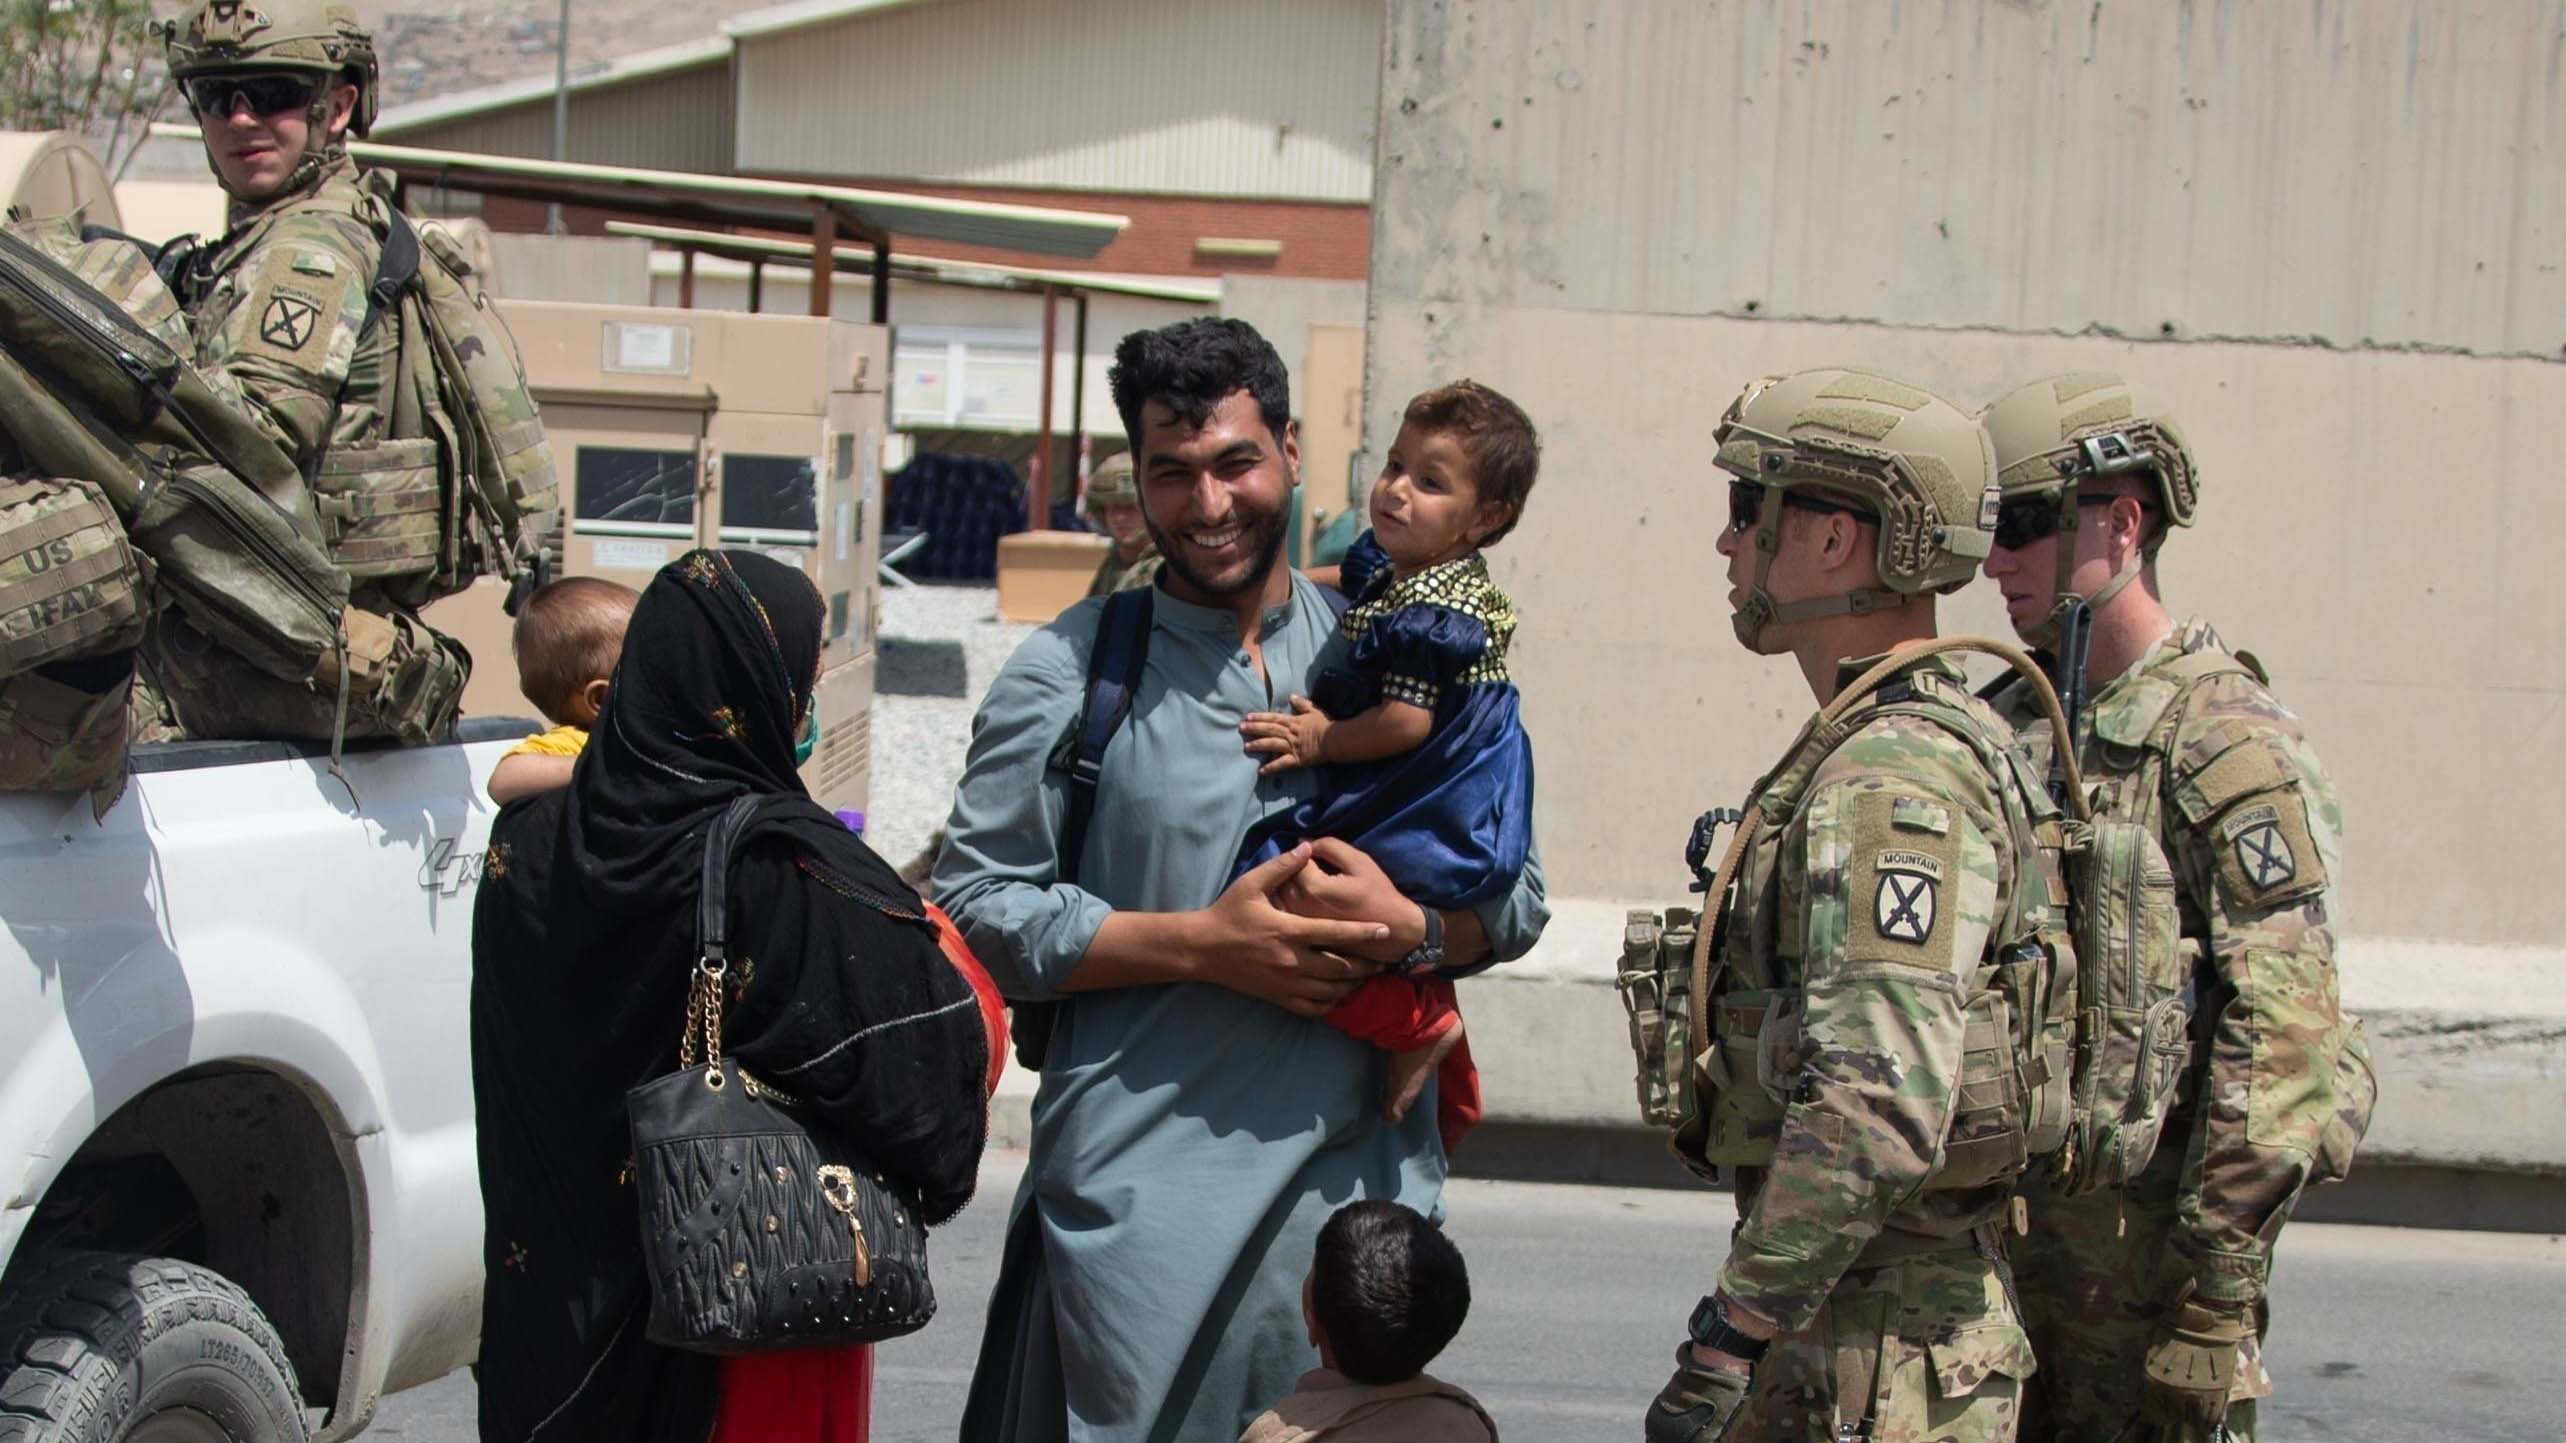 Soldiers talk to an Afghan family during the withdrawal.